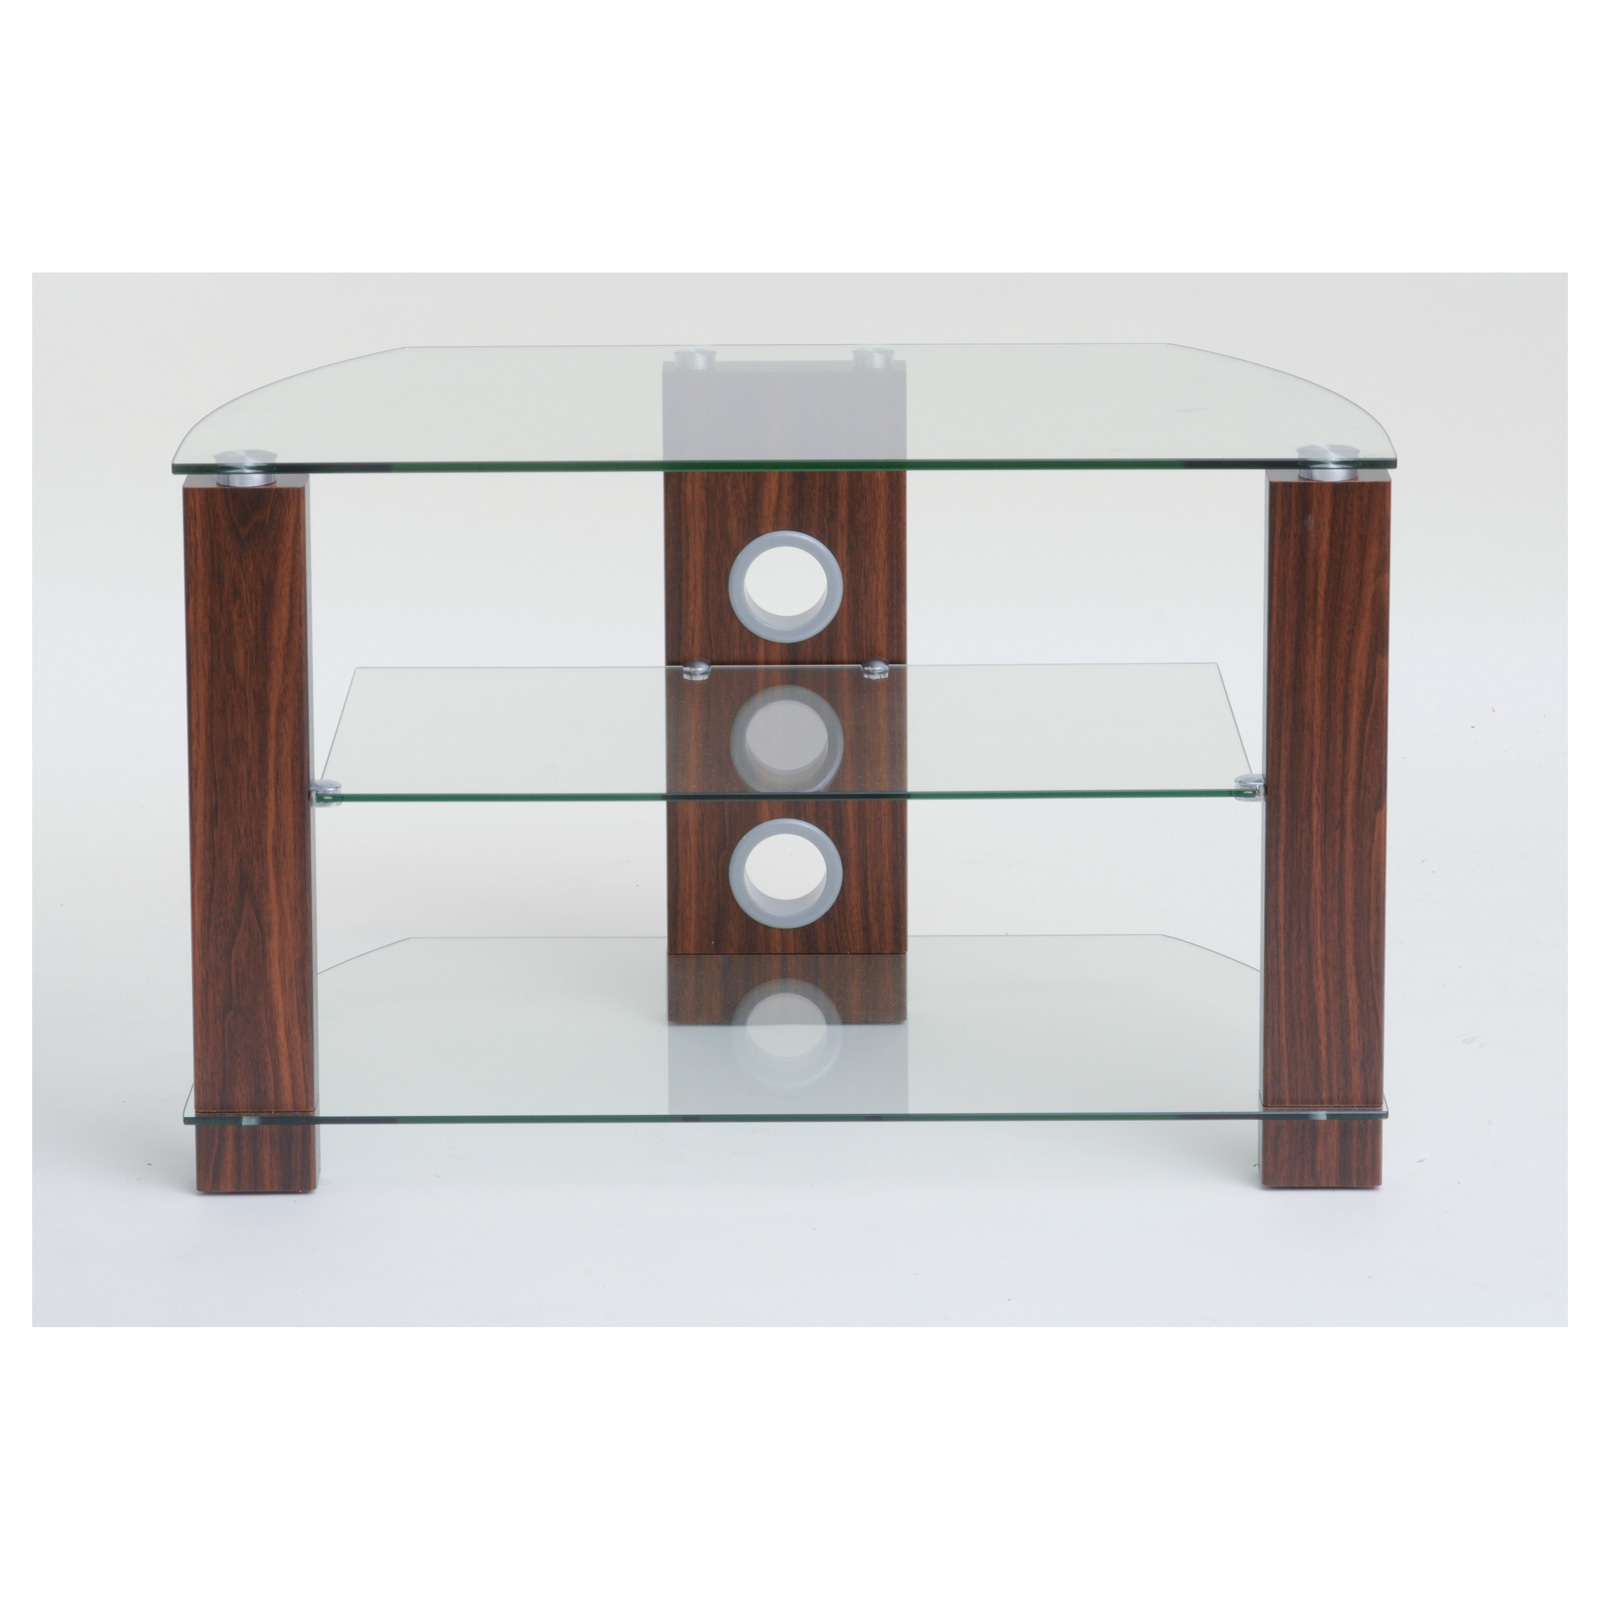 Photos - Mount/Stand TTAP L630 800 3WC Vision 800mm TV Stand in Walnut with Clear Glass L630-80 